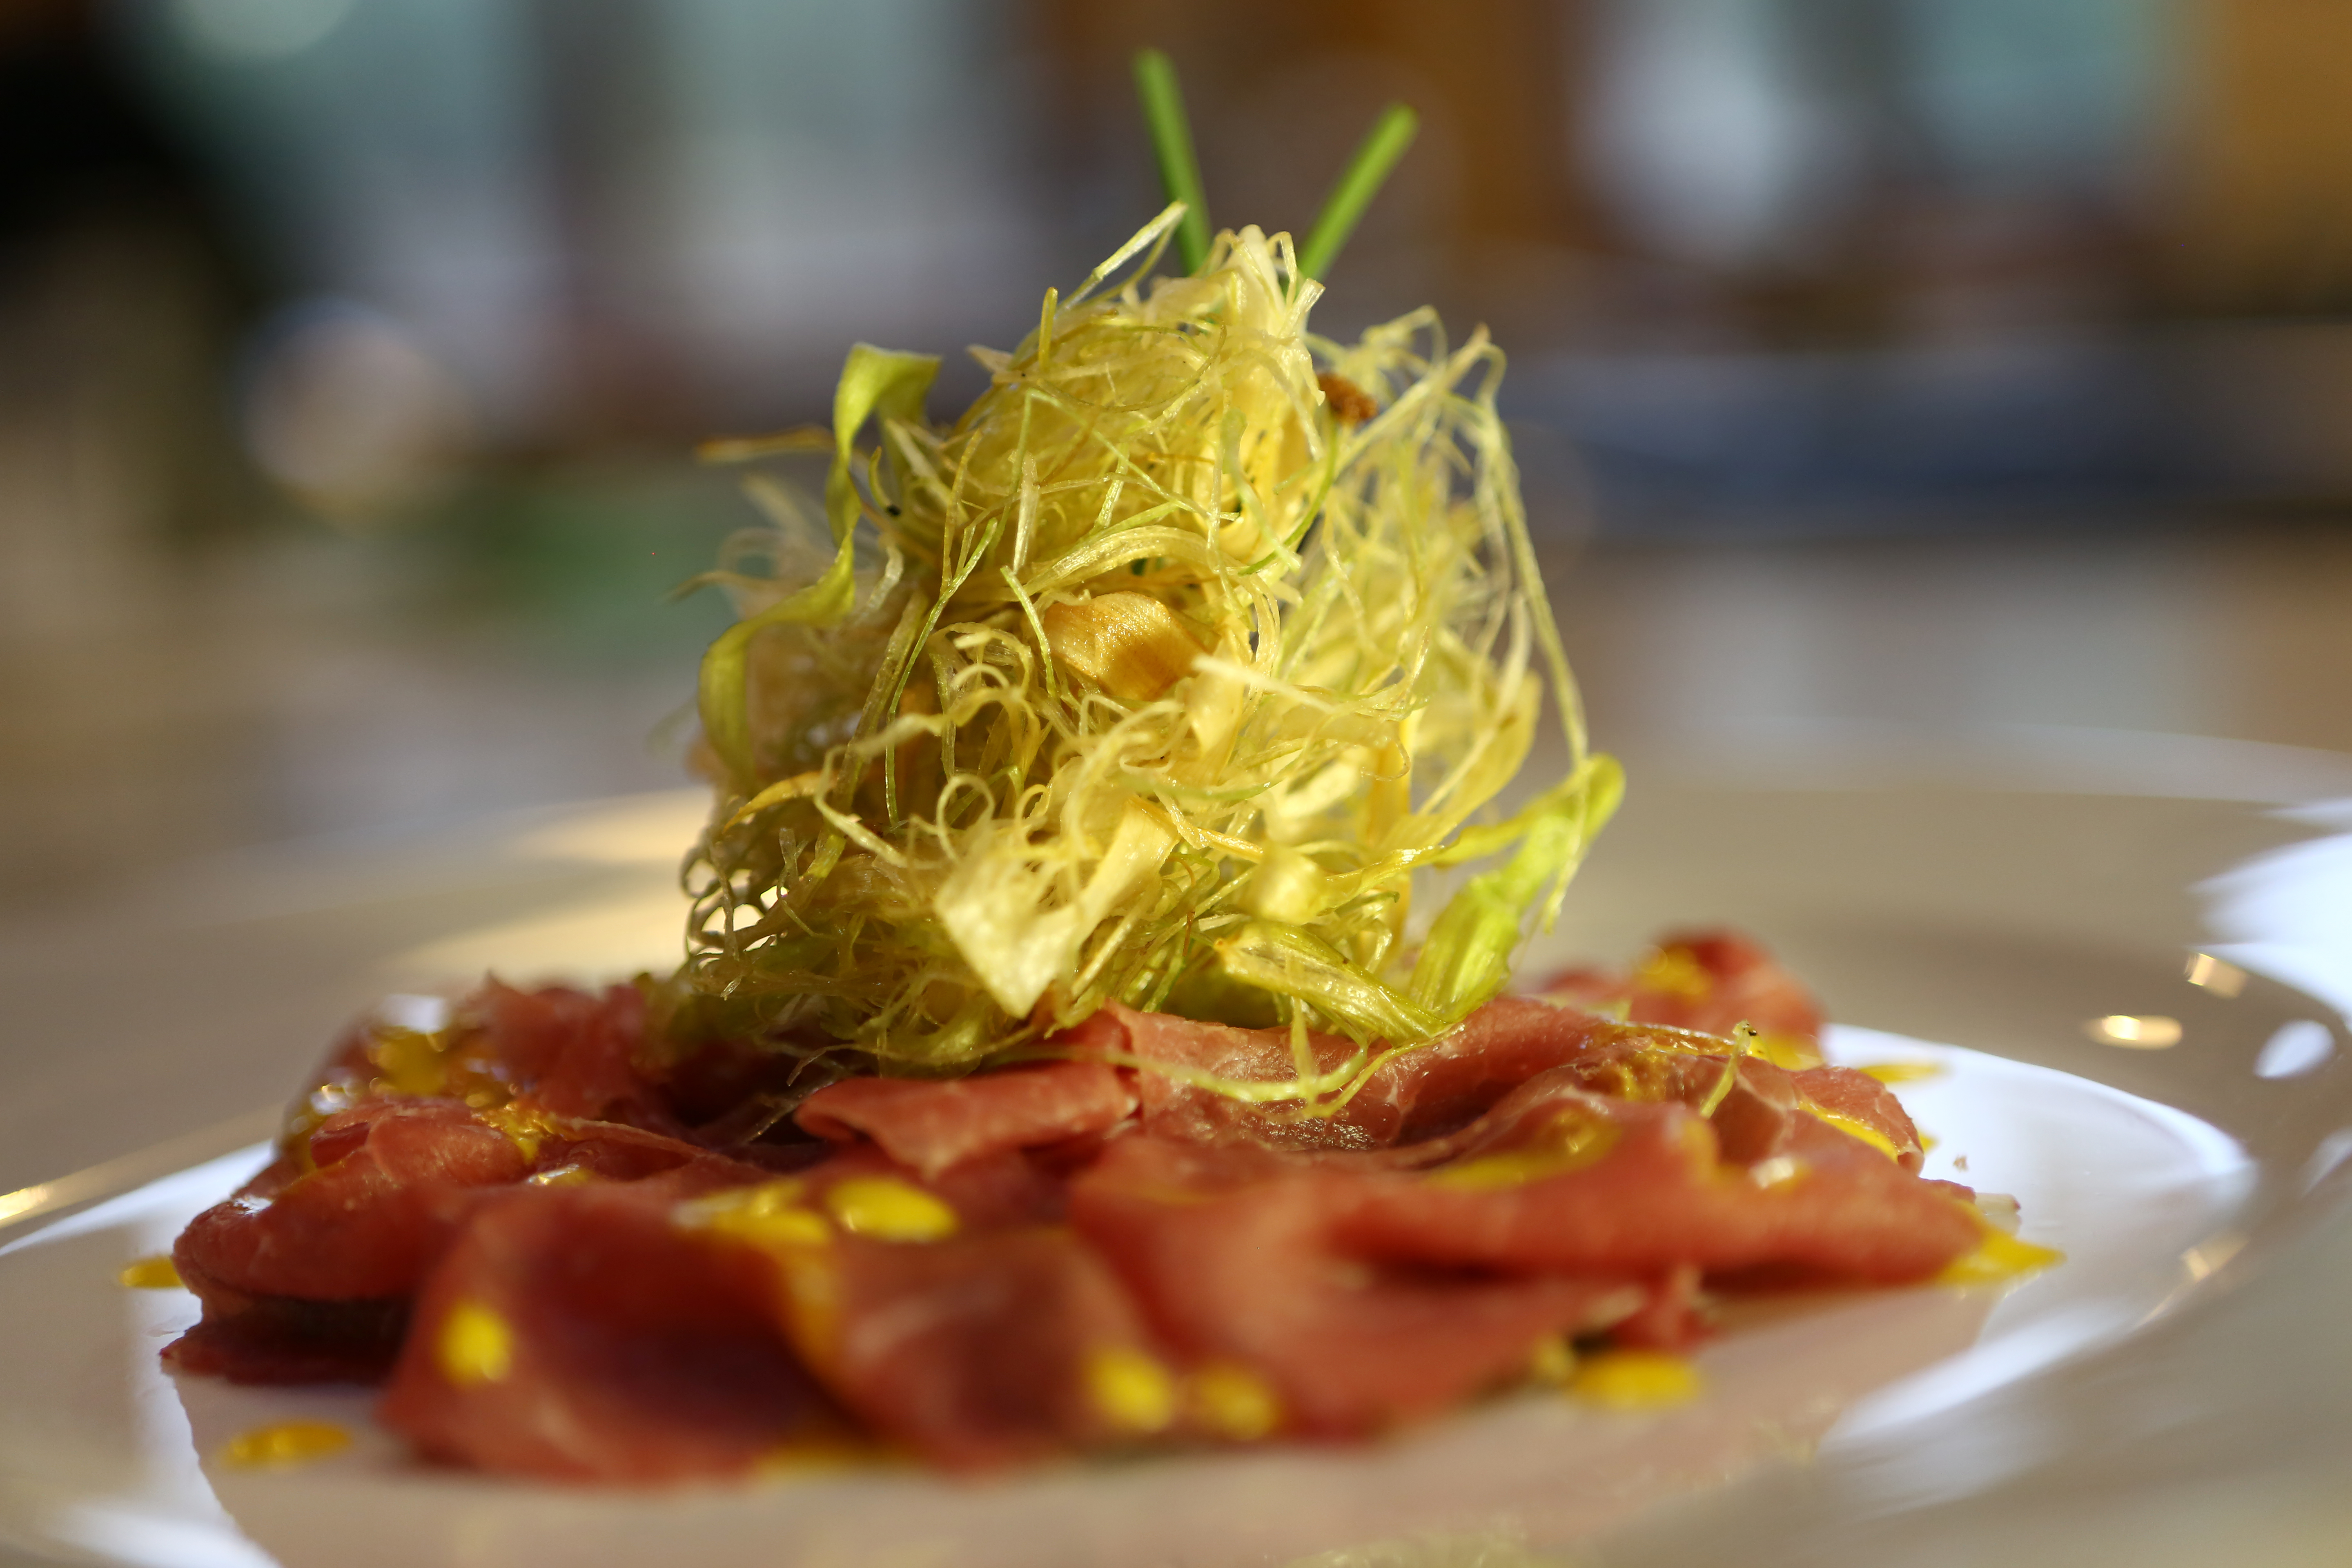 #recipe: Salted beef flavoured with zabaione made with Parmiggiano cheese and crispy leek